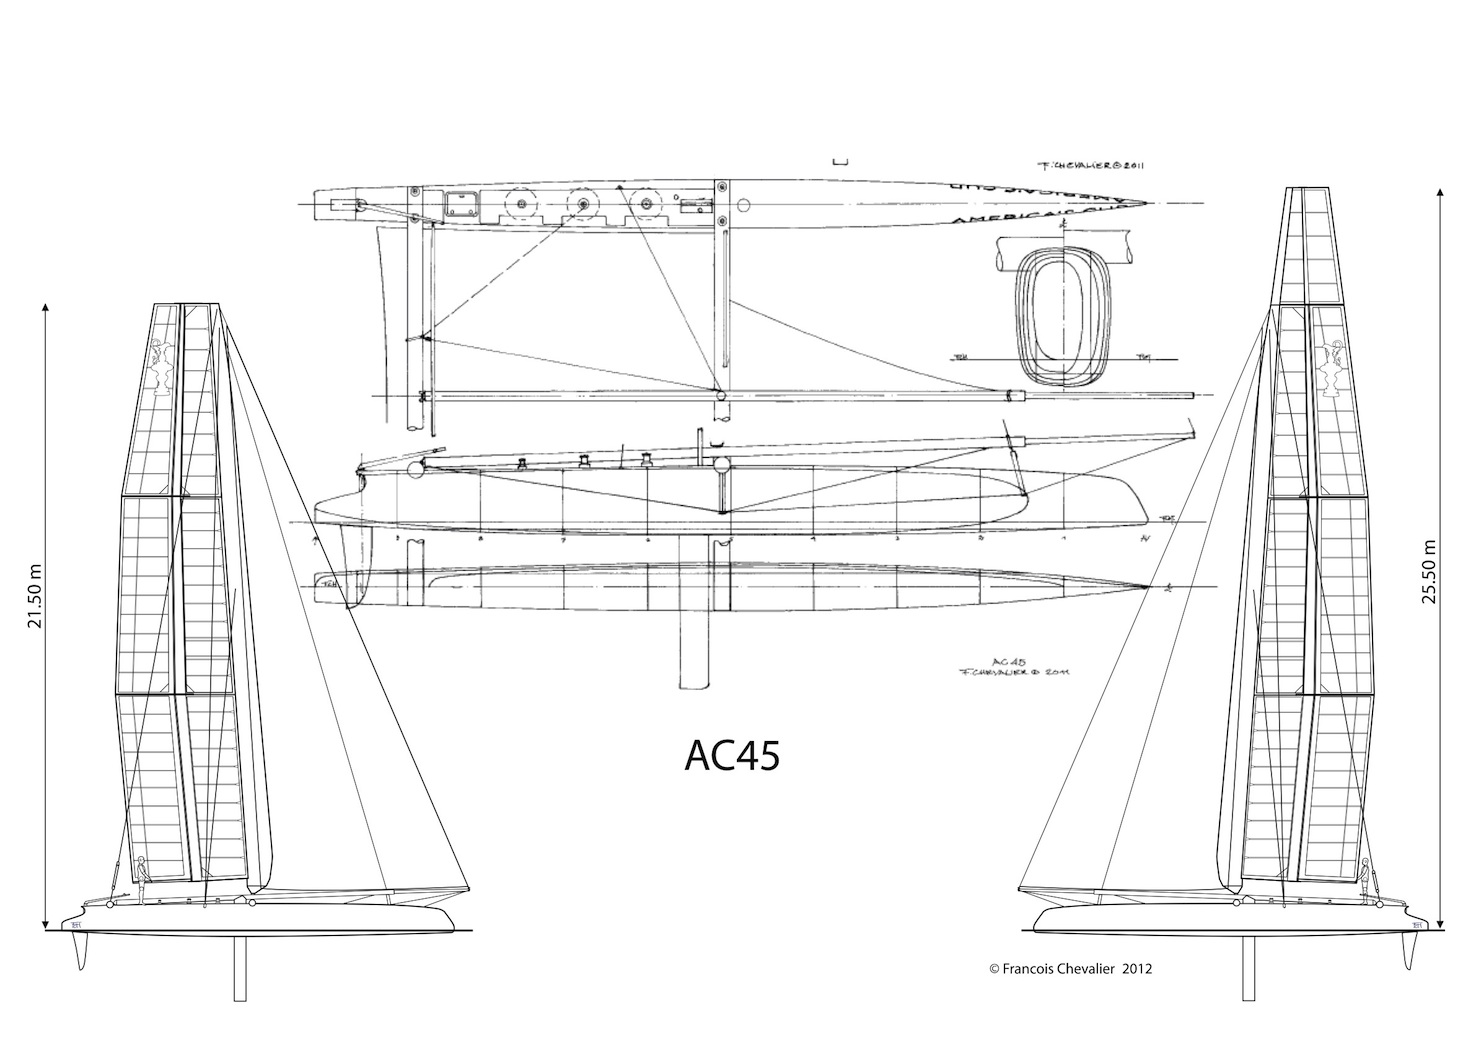 Chevalier Taglang: AMERICA'S CUP - AC45 PLANS - AC45 LINES 